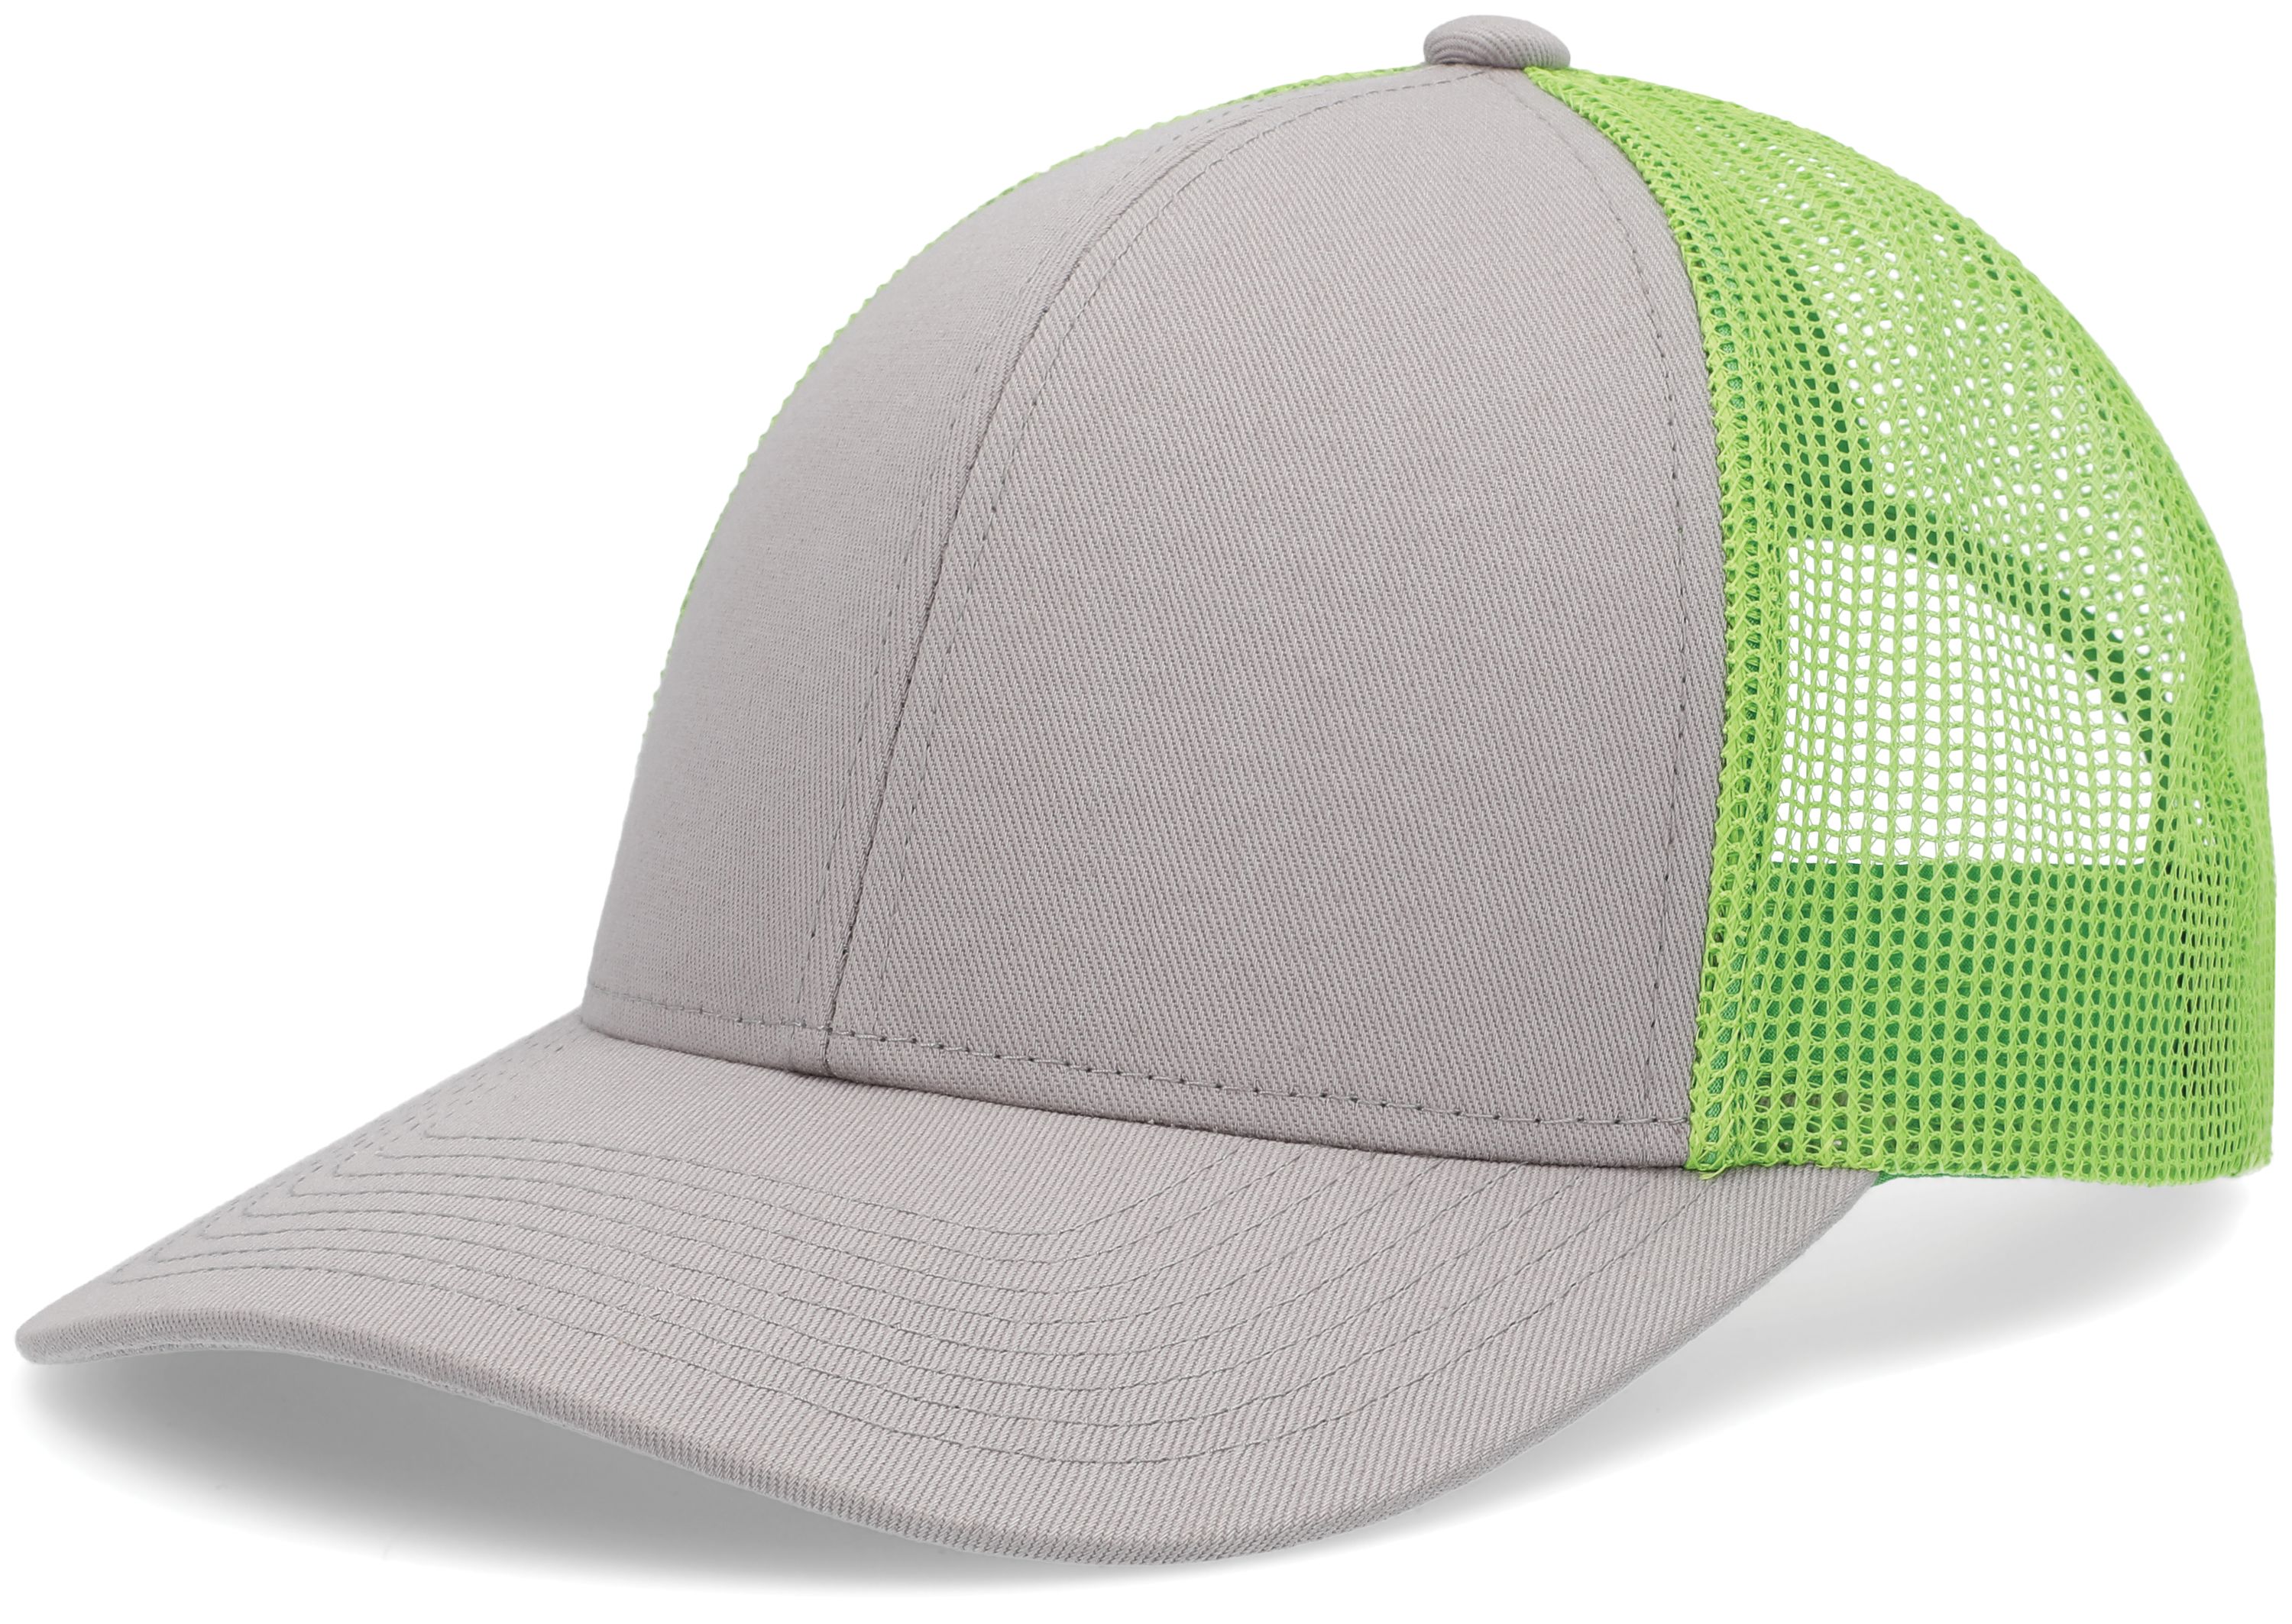 click to view Heather Grey/Neon Green/Heather Grey